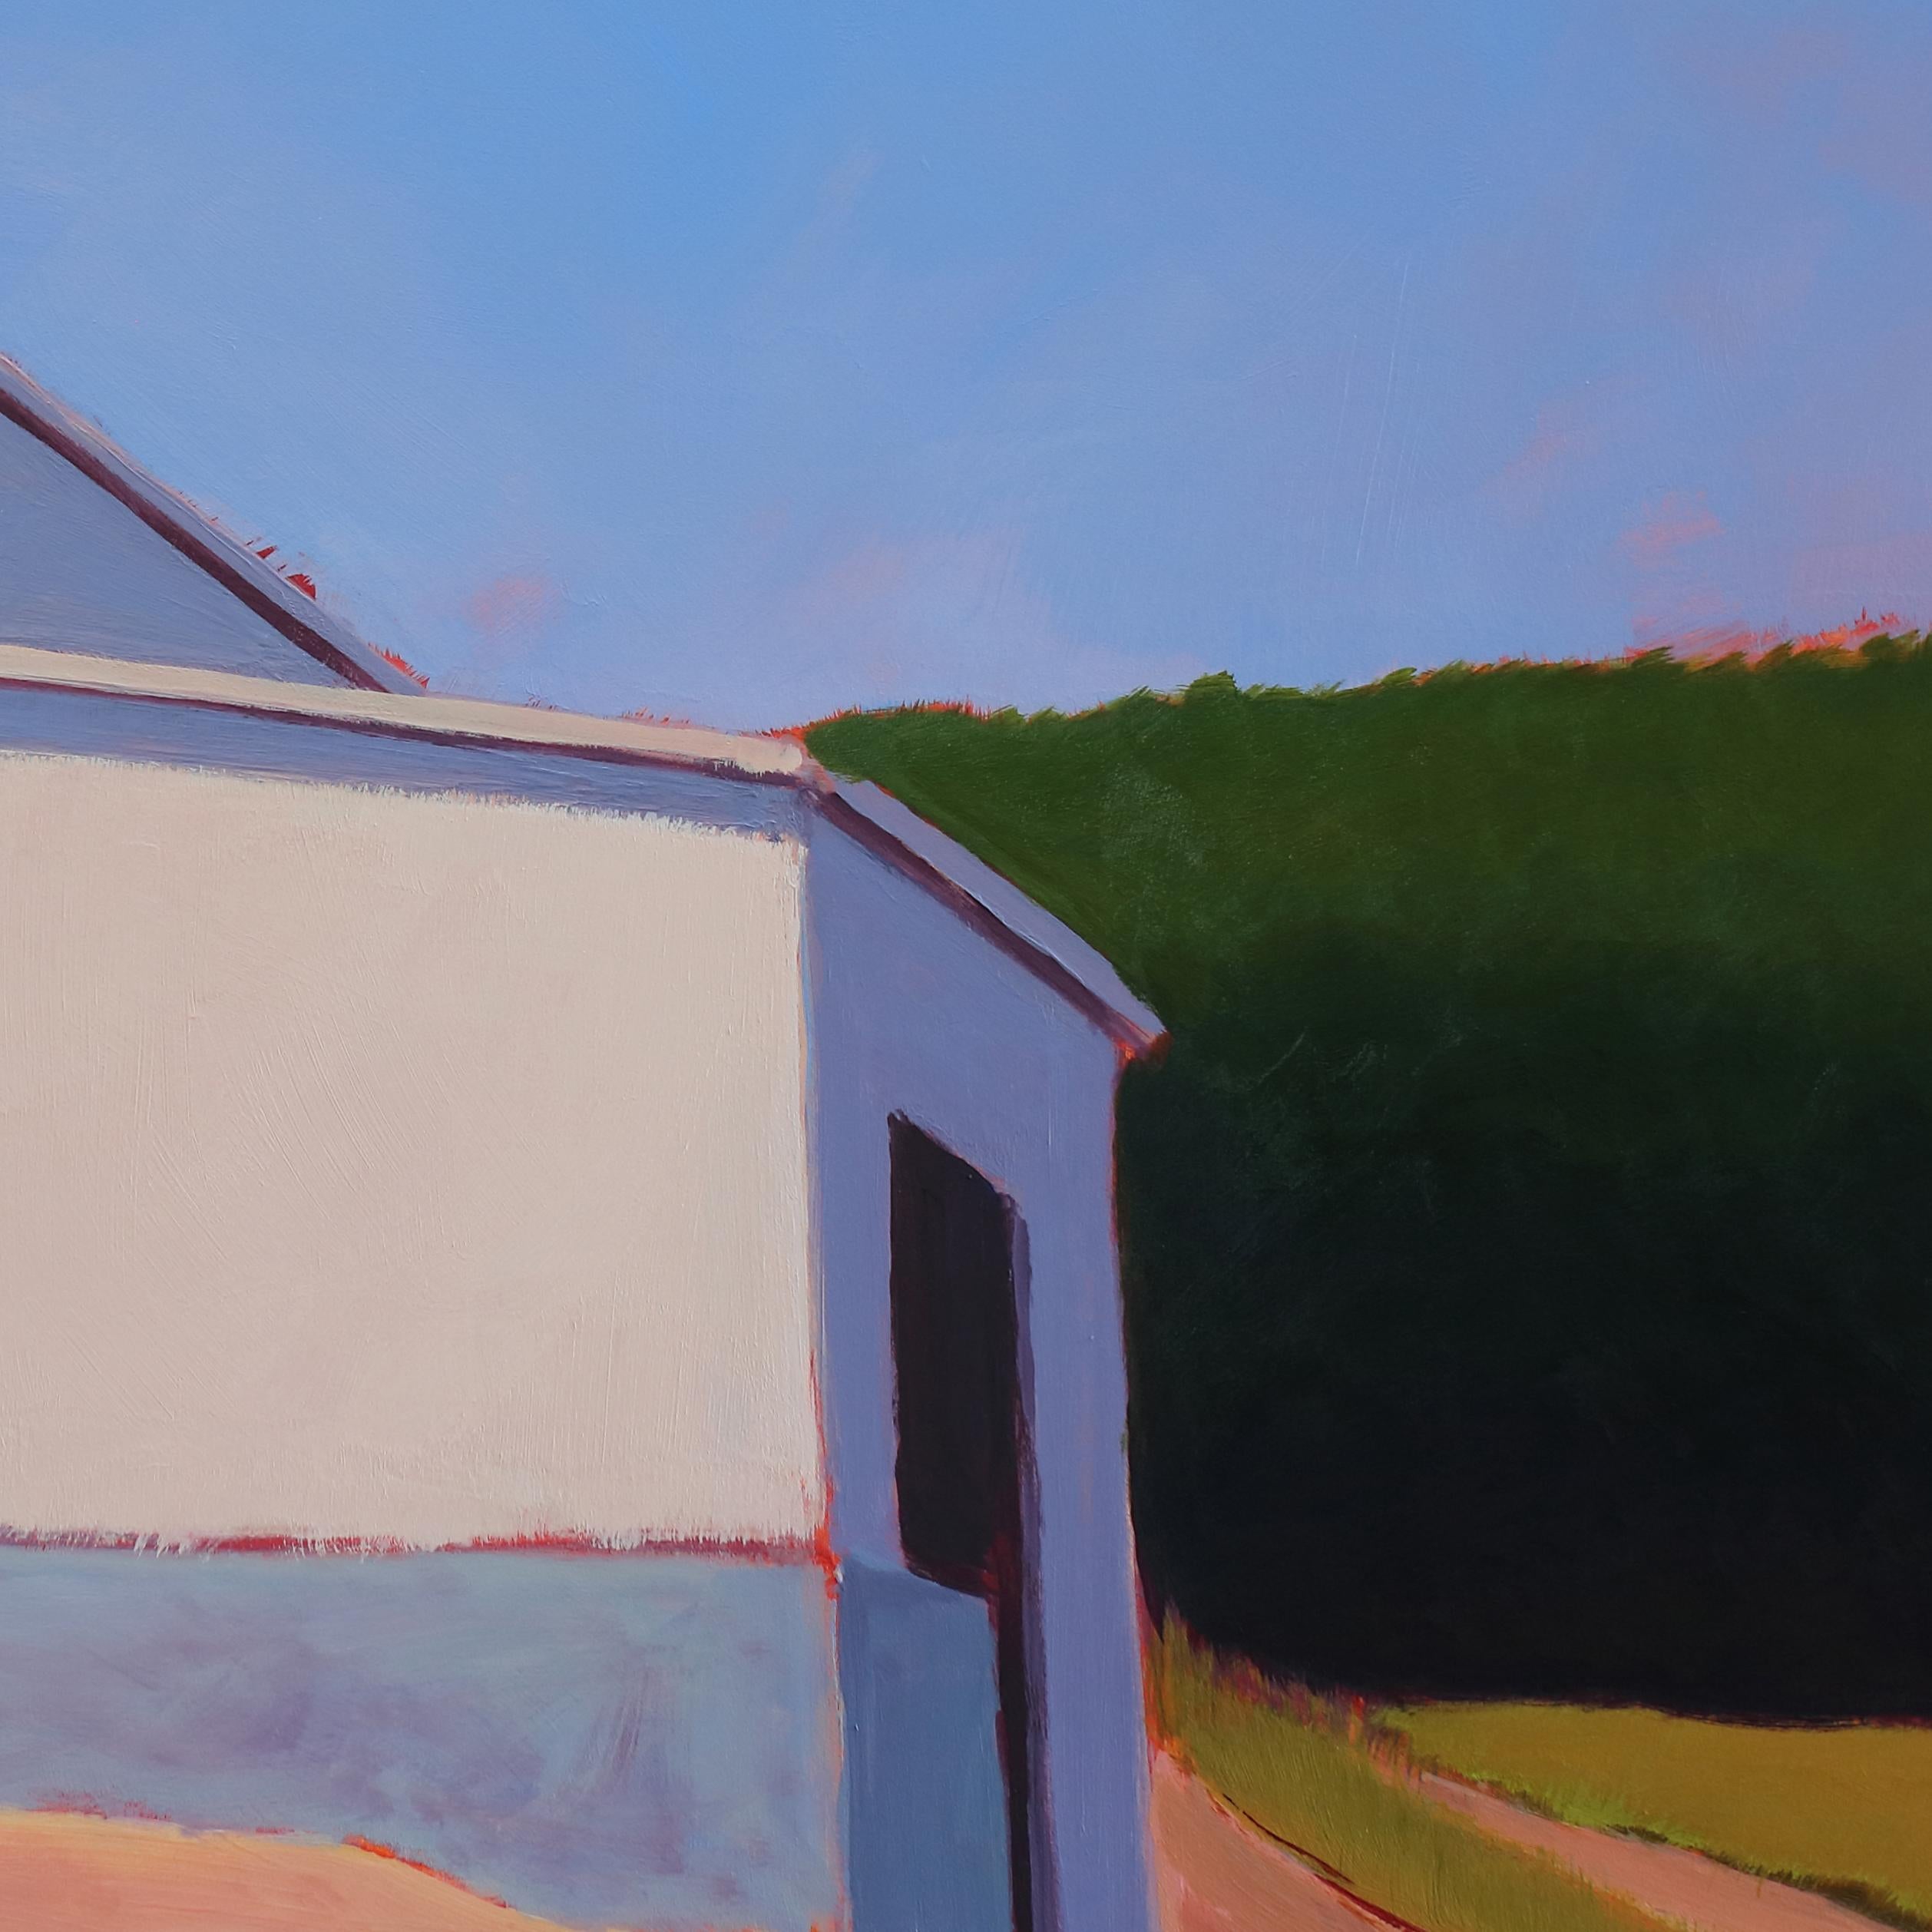 This contemporary landscape painting by Carol Young captures a warm white, barn-like building in a countryside setting. The building is built into a small hill, which is covered in green grass and patches of warm-toned dirt. A line of deep green